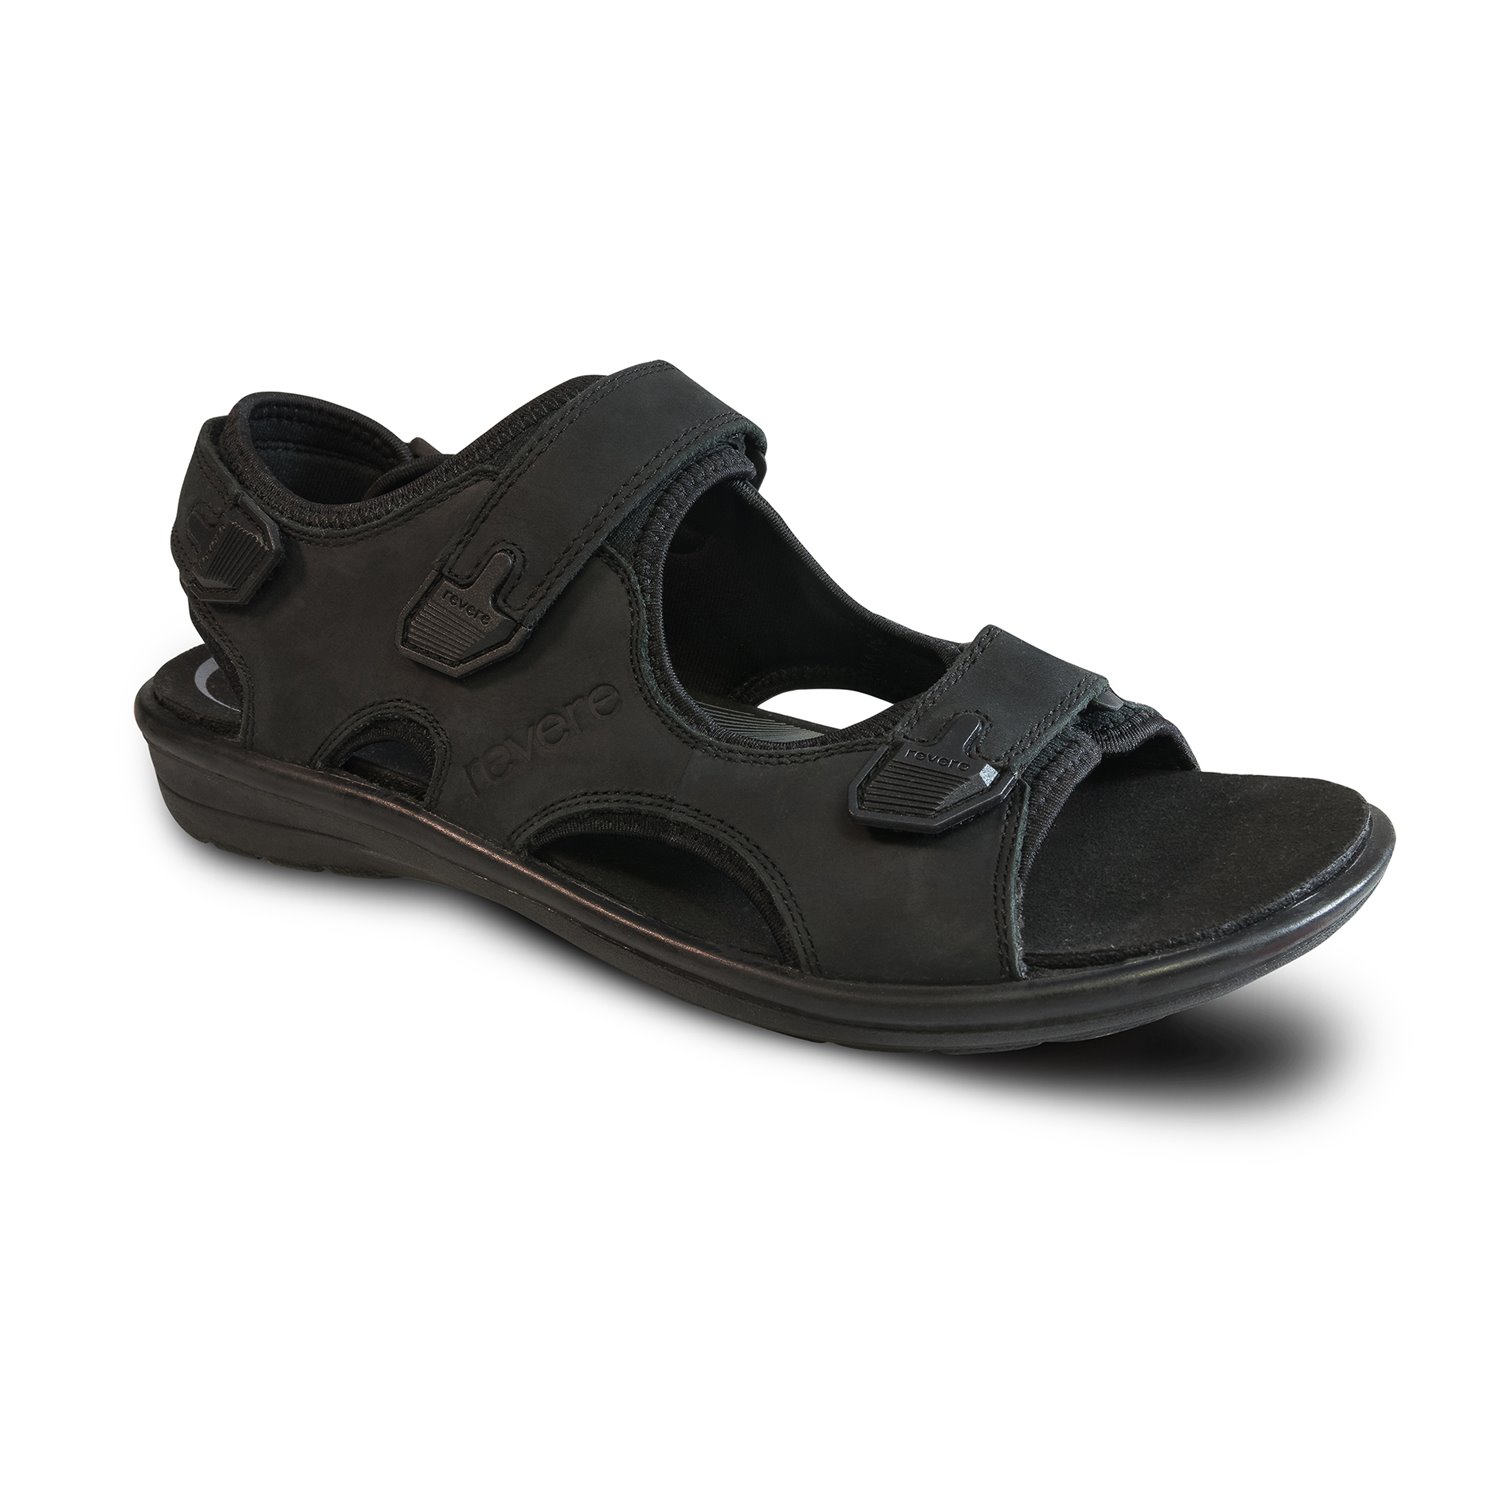 black sandals with backstrap